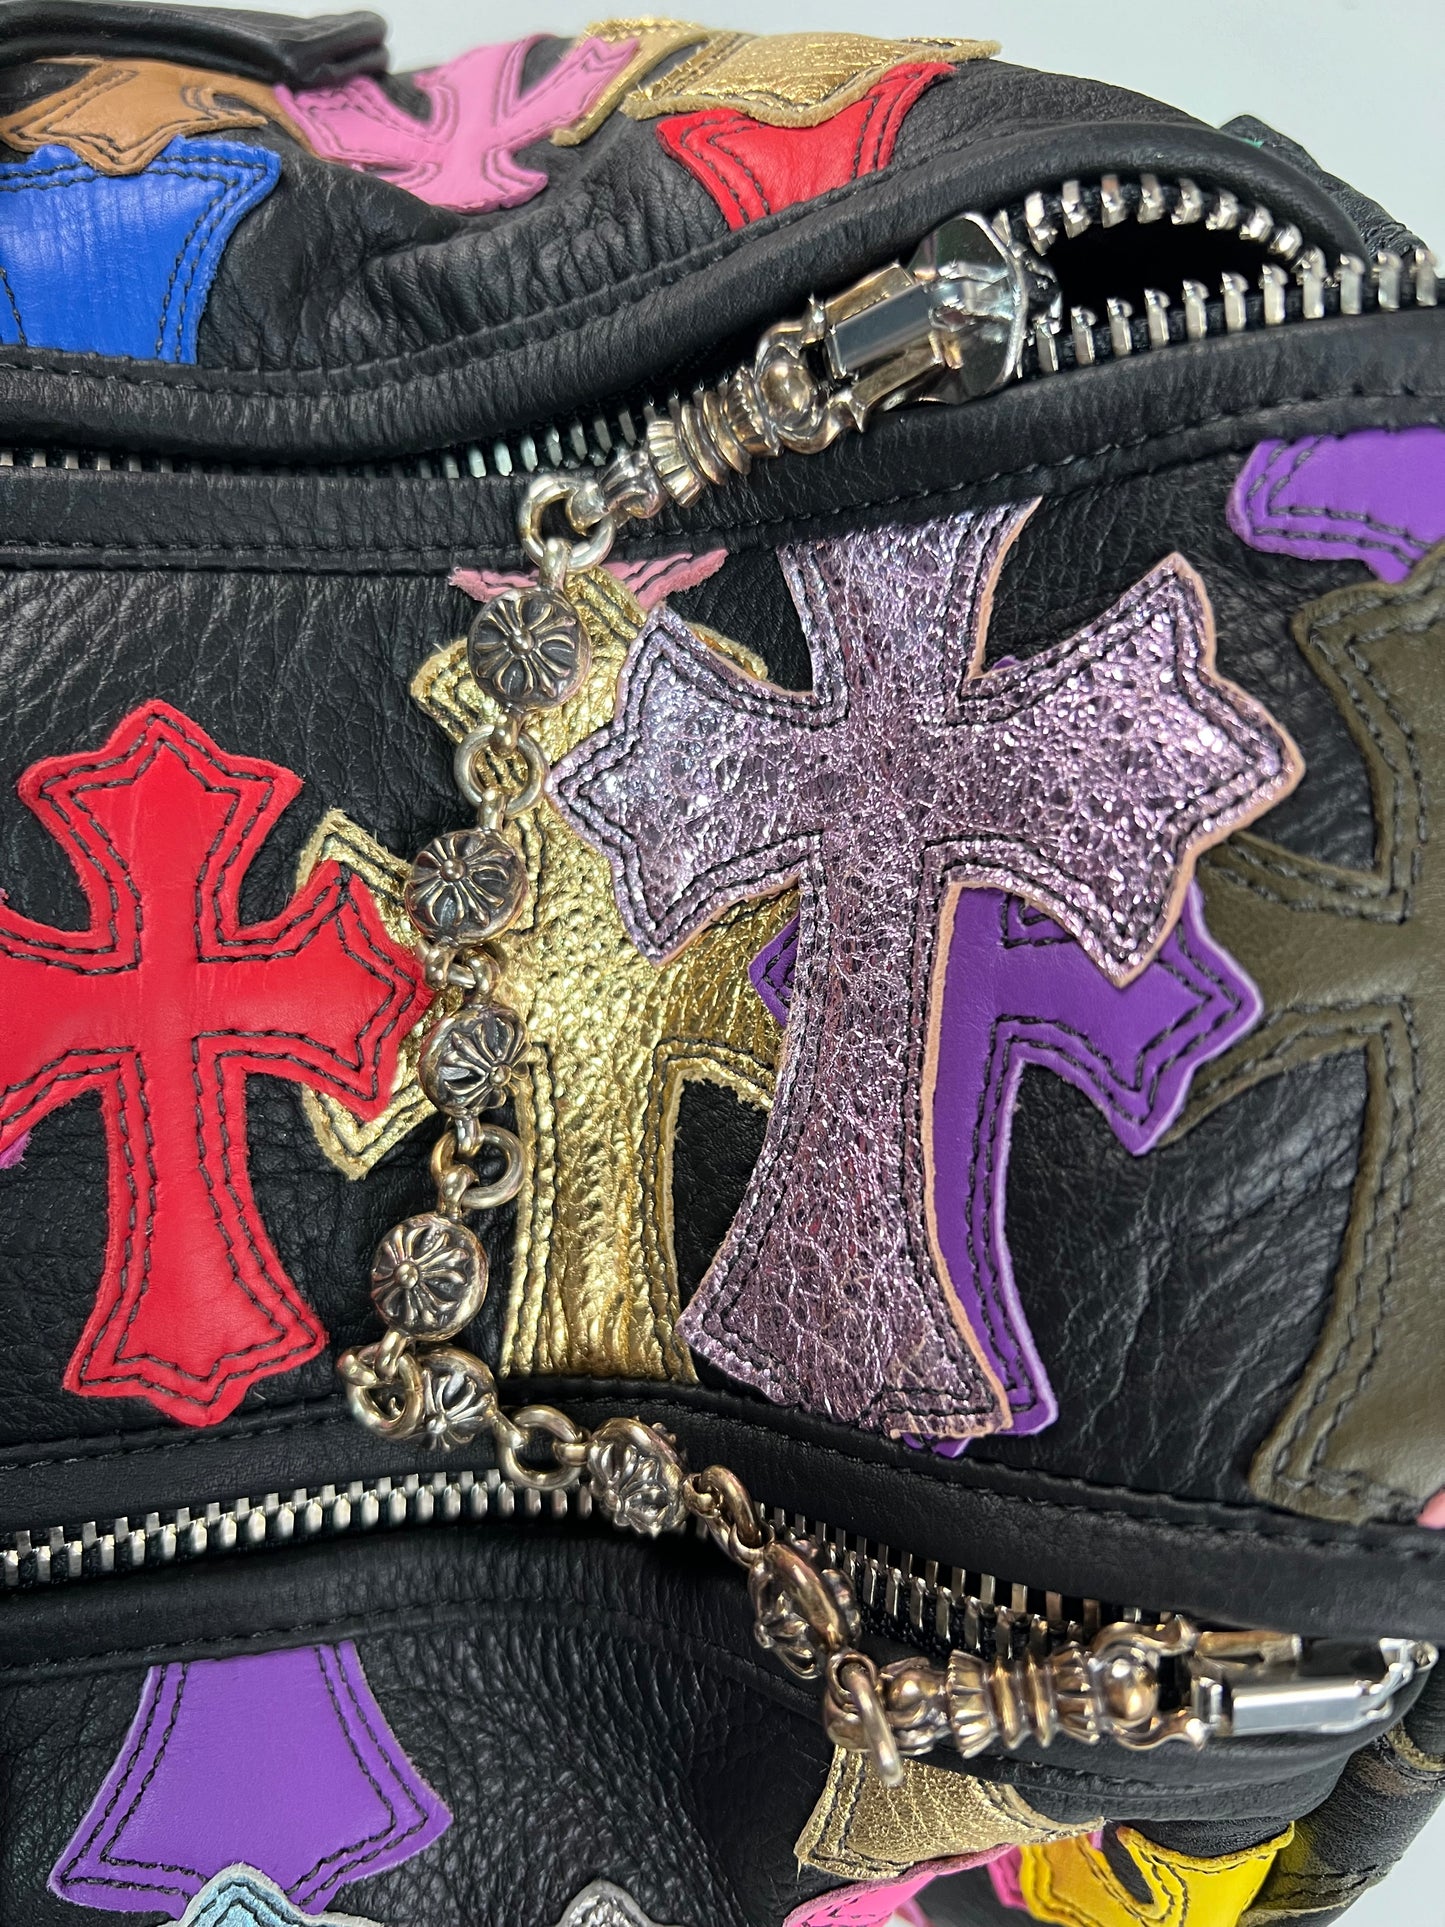 Chrome Hearts multi color patched 1of1 XL duffle Bag SZ:OS